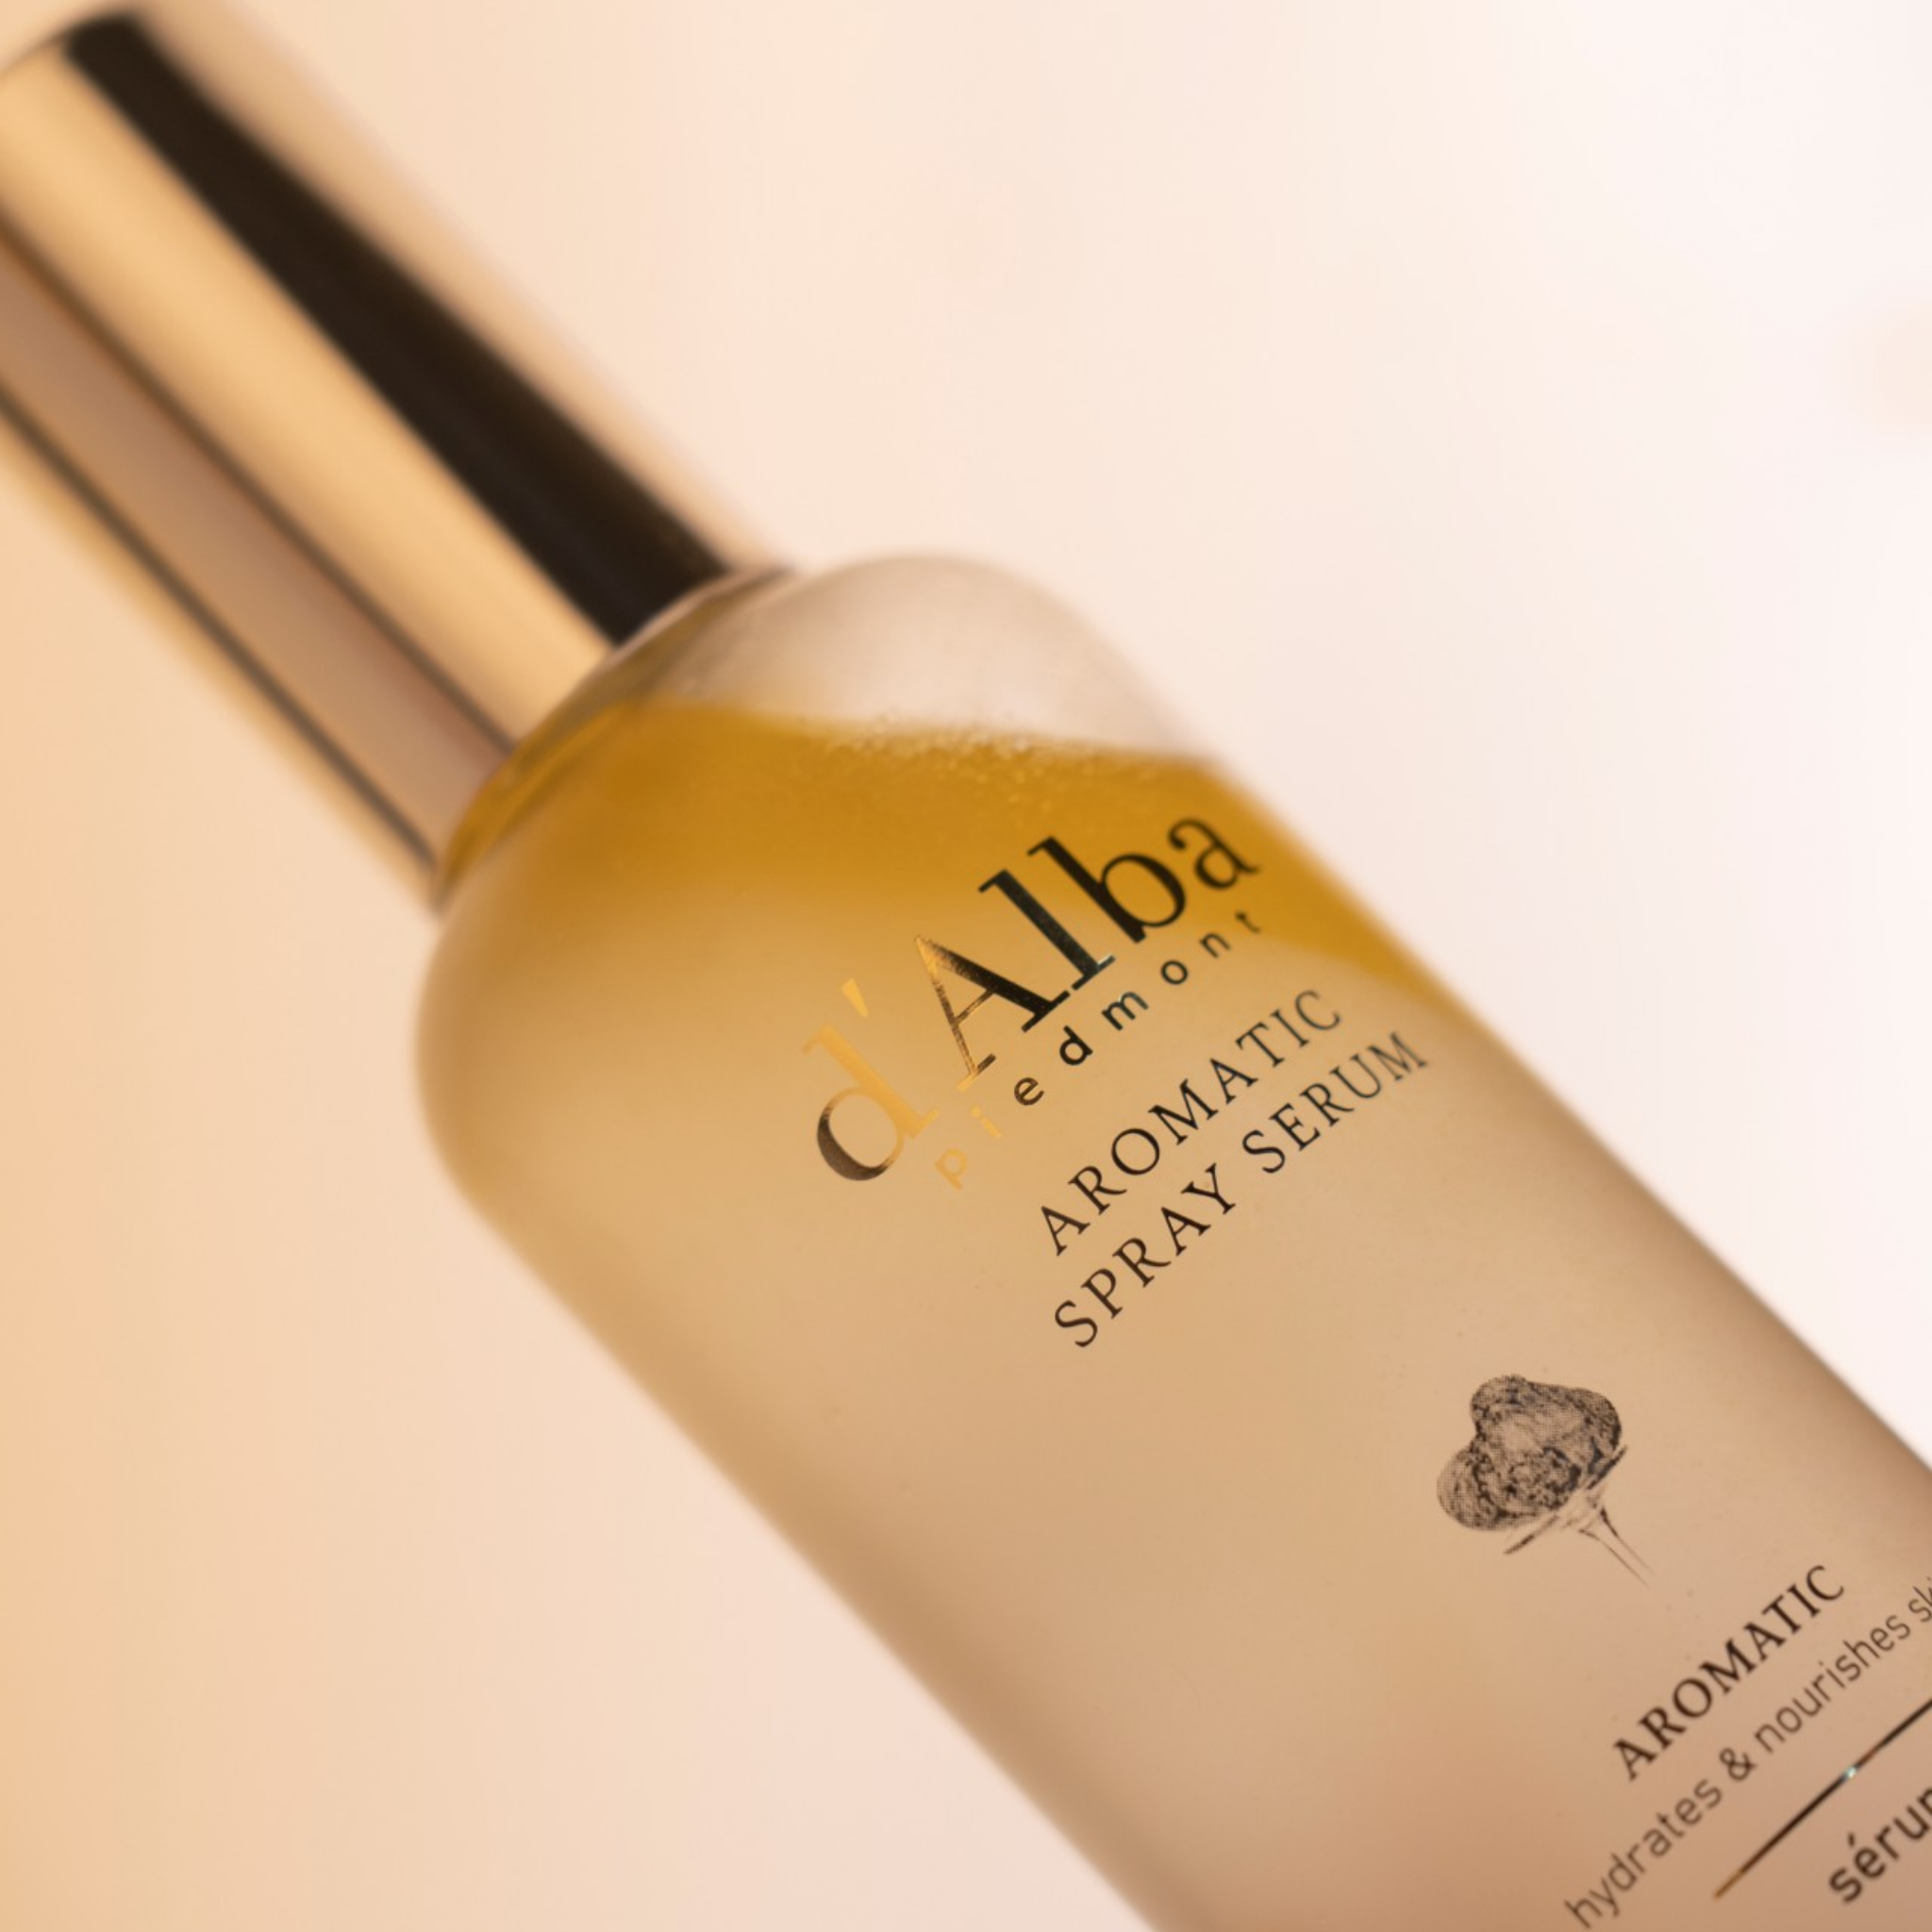 D’ALBA White Truffle First Aromatic Spray Serum Mini (60ml) close up image showing the oil and serum